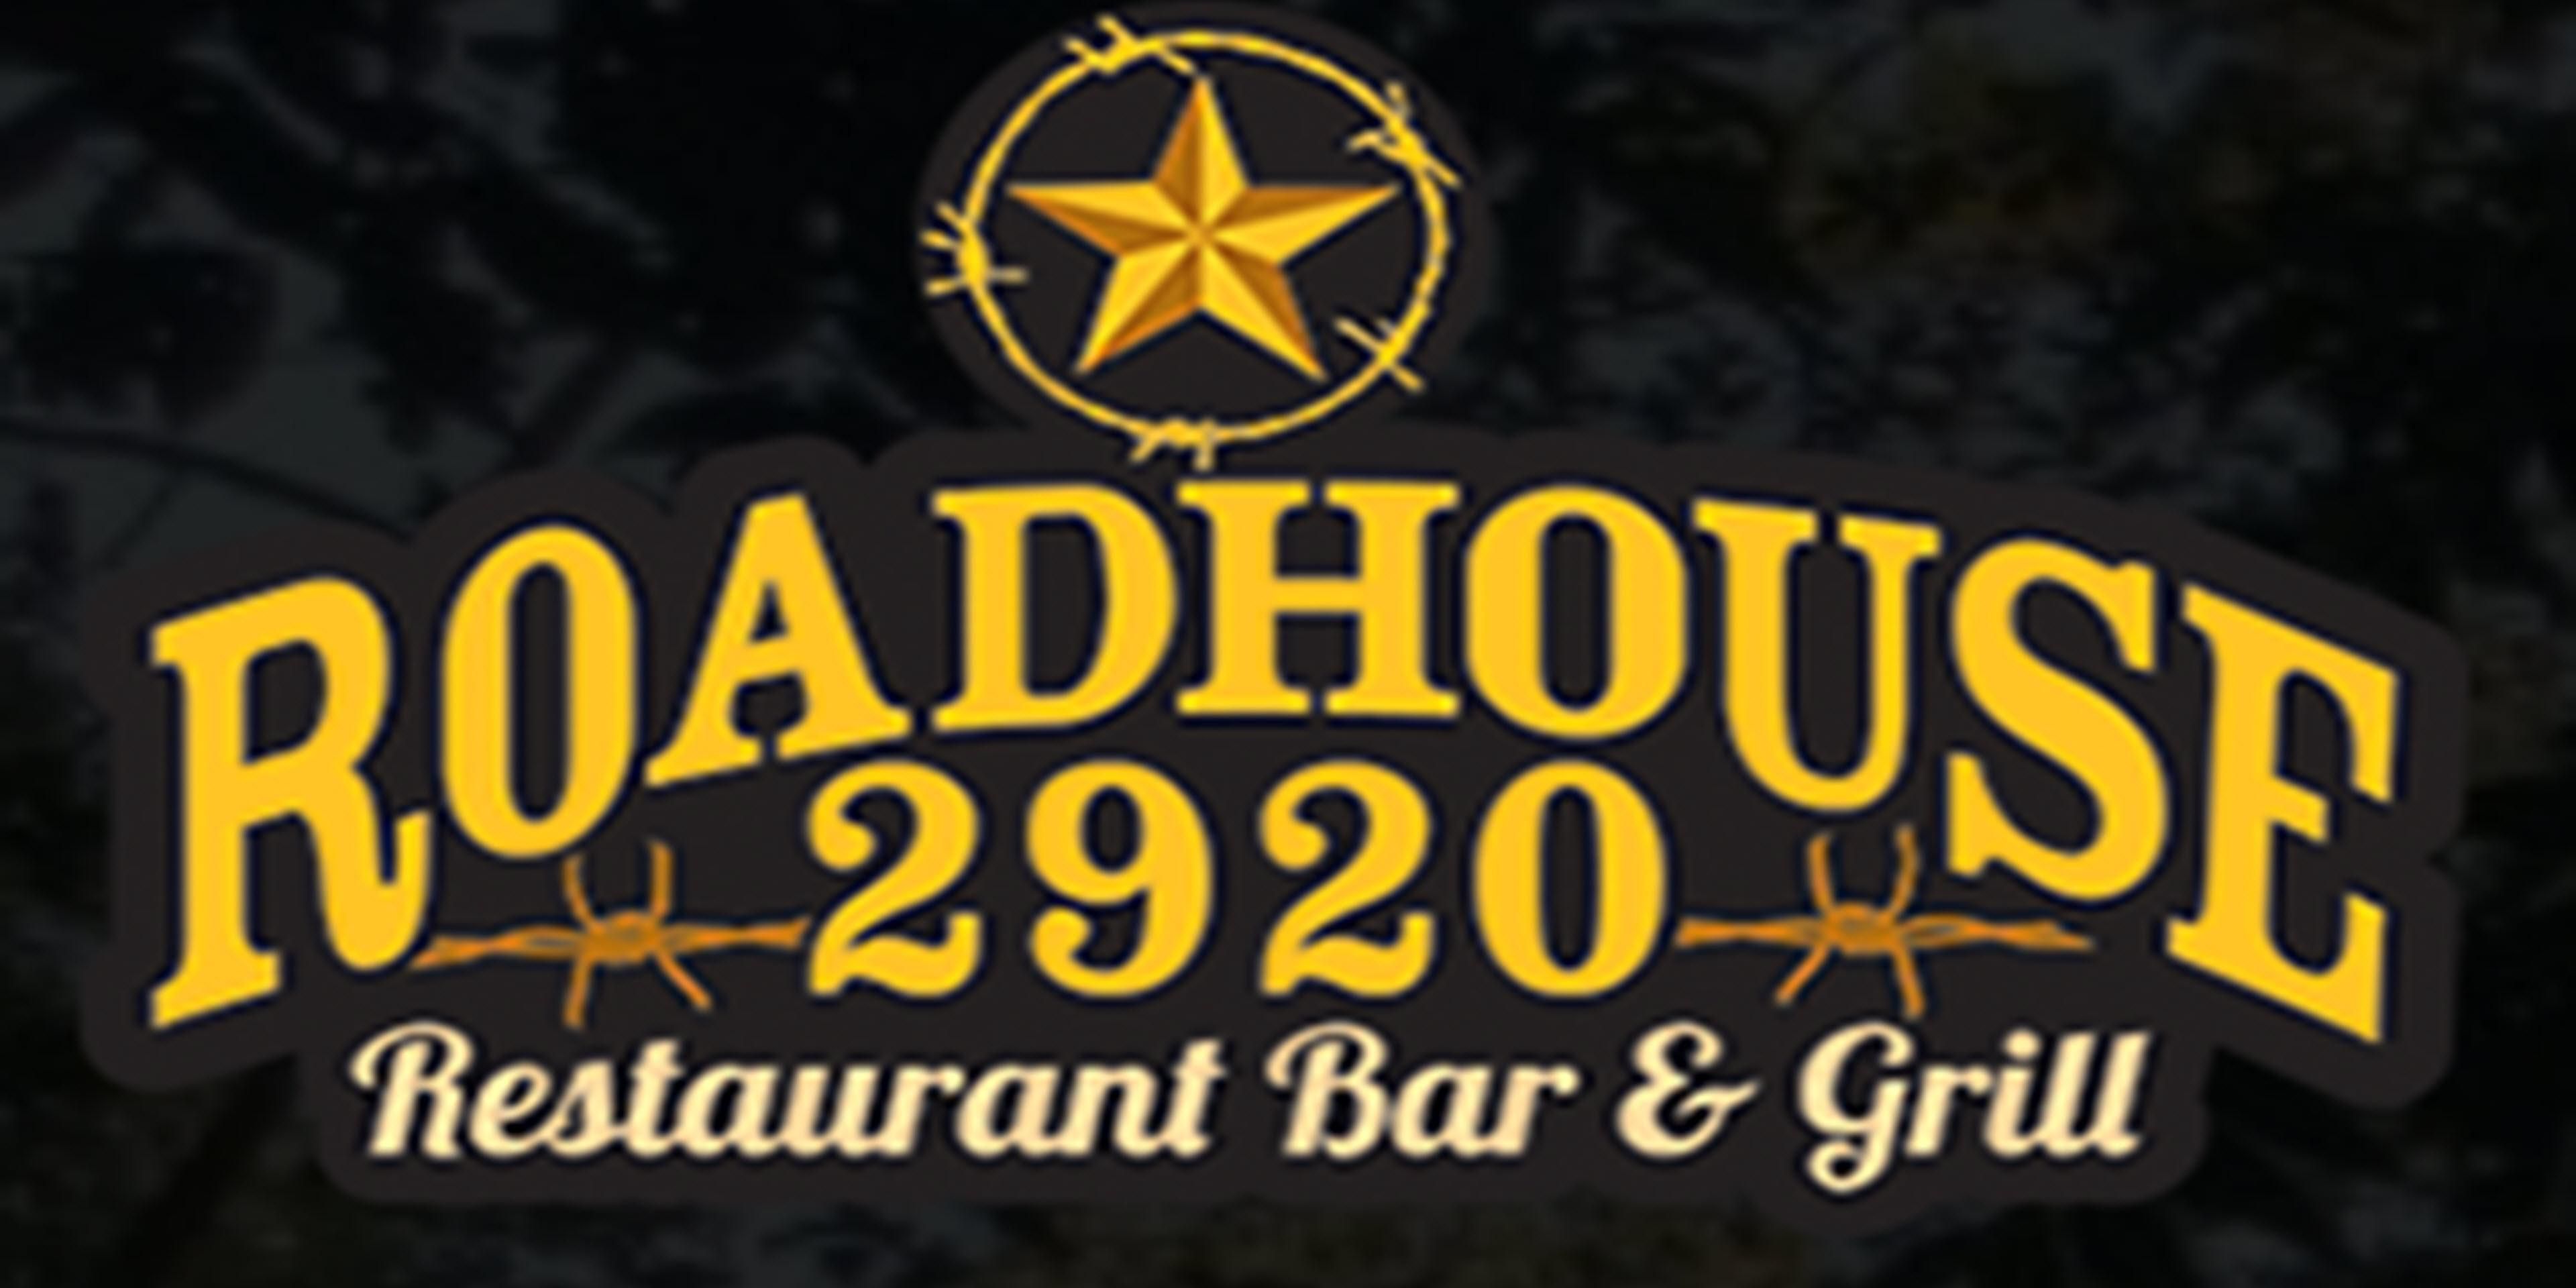 2920 RoadHouse celebrates the Township of New Kentucky and its connection to the Texas War of Independence, while offering a family-friendly environment for a nice meal and a historic property to be enjoyed by all. The menu also honors its provincial roots with traditional southern dishes and a full Texas bar.